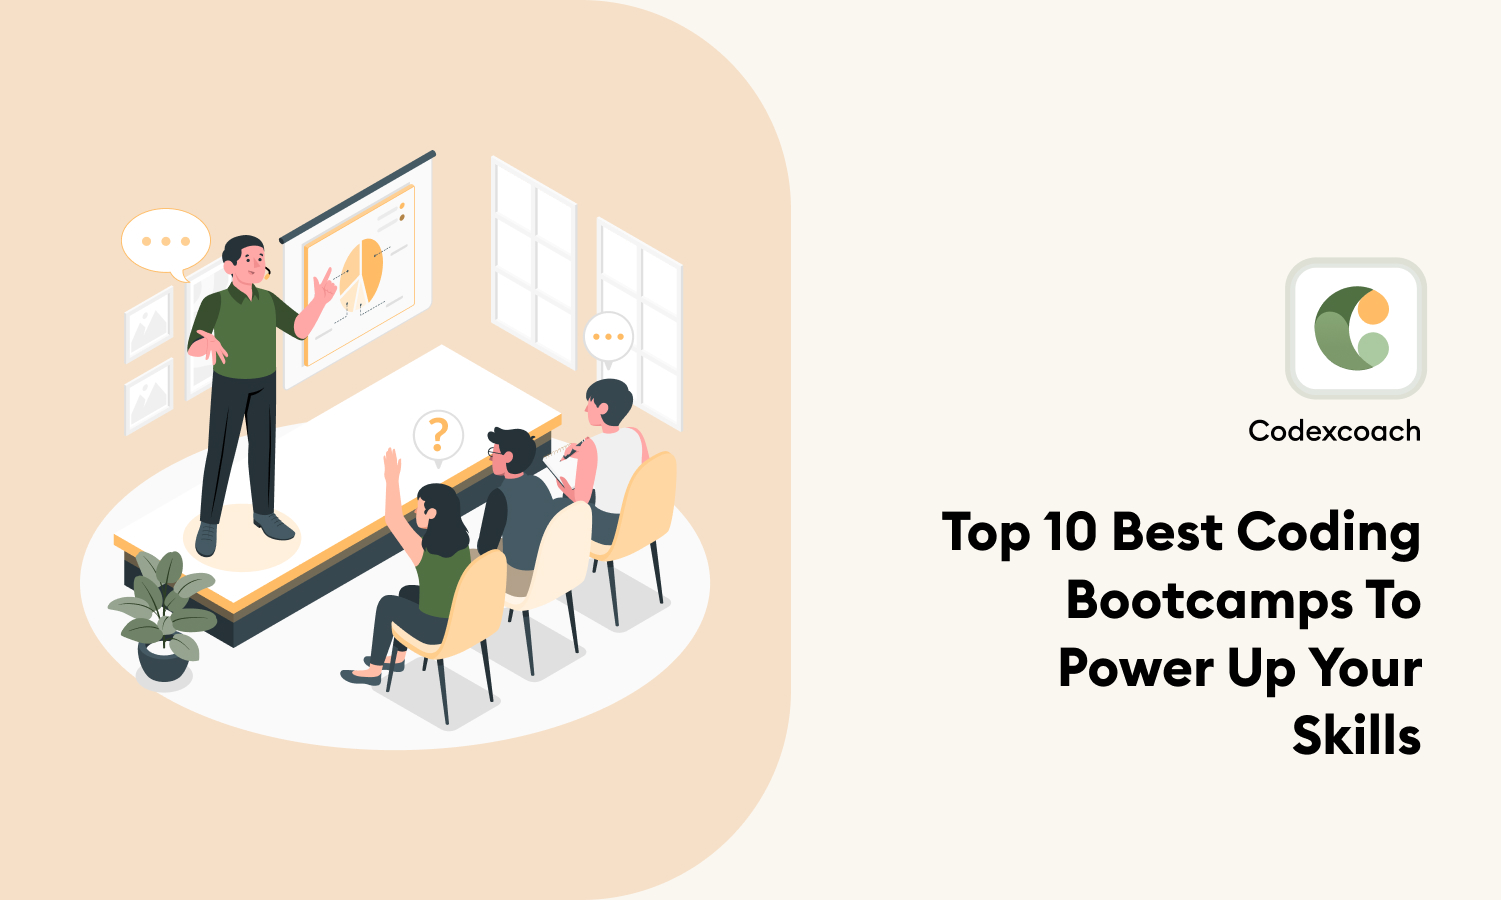 Top 10 Best Coding Bootcamps To Power Up Your Skills